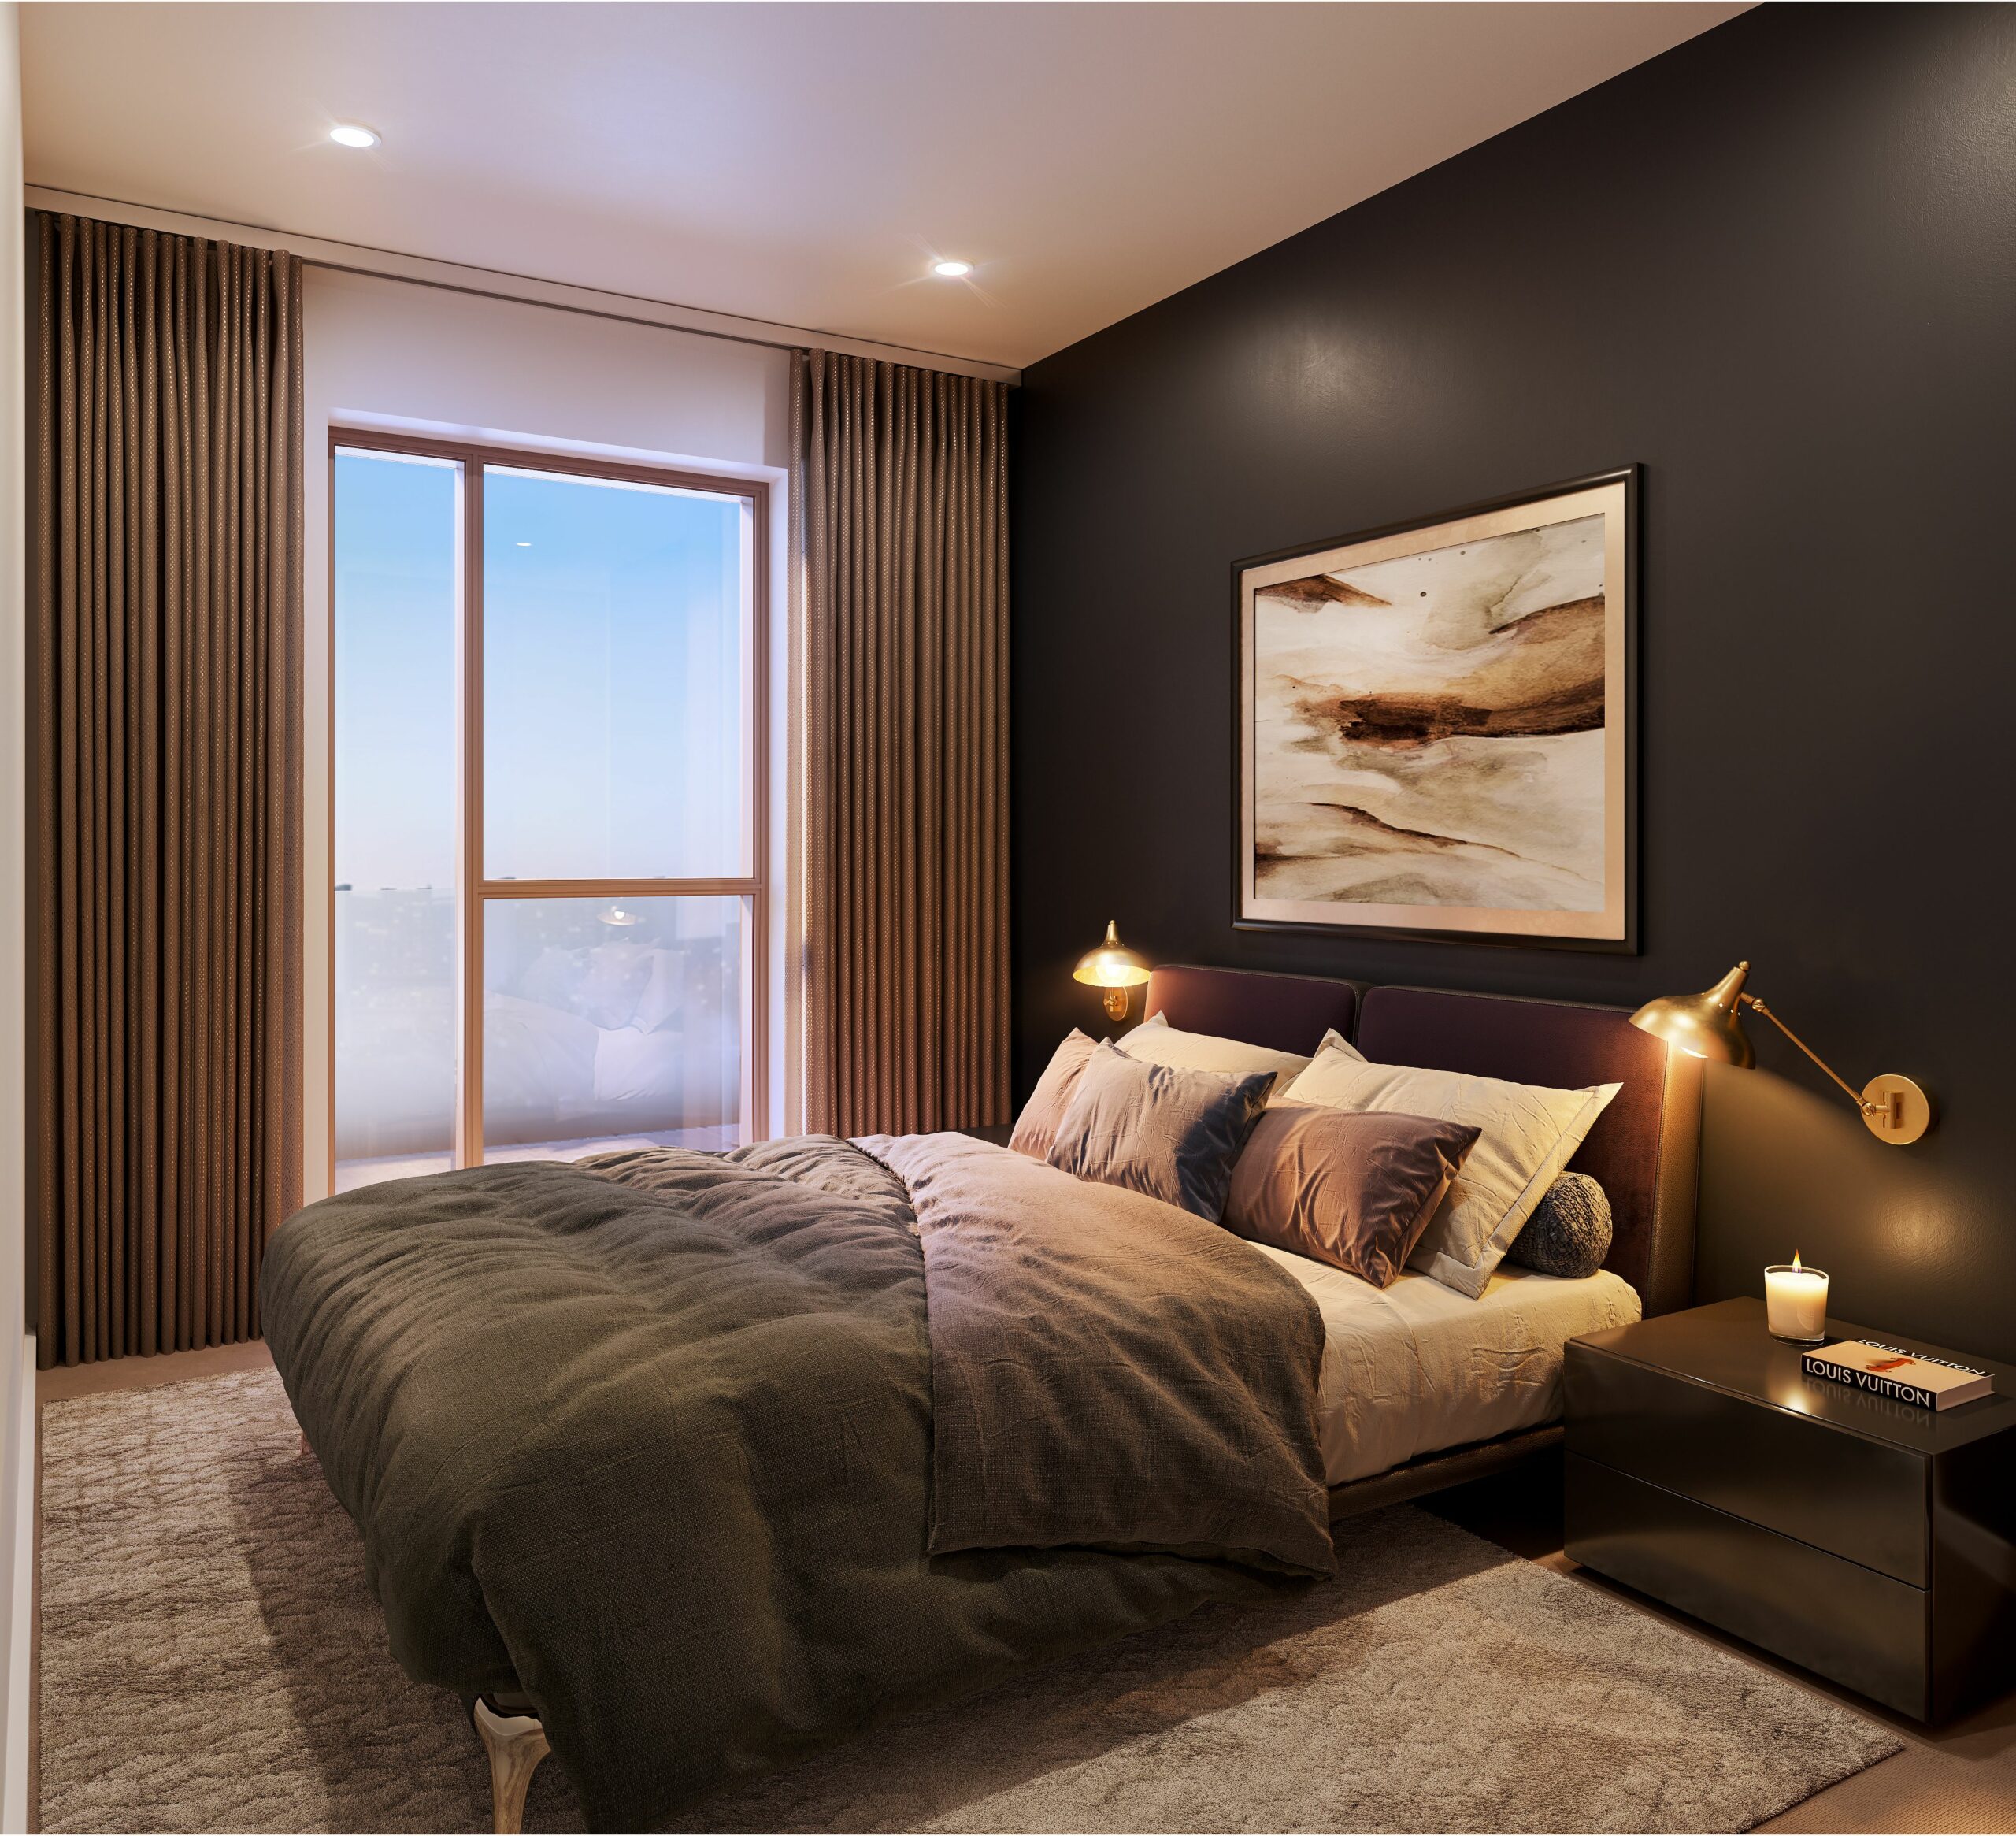 The residence alliance investments Interior bedroom luxurey 3d cgi London